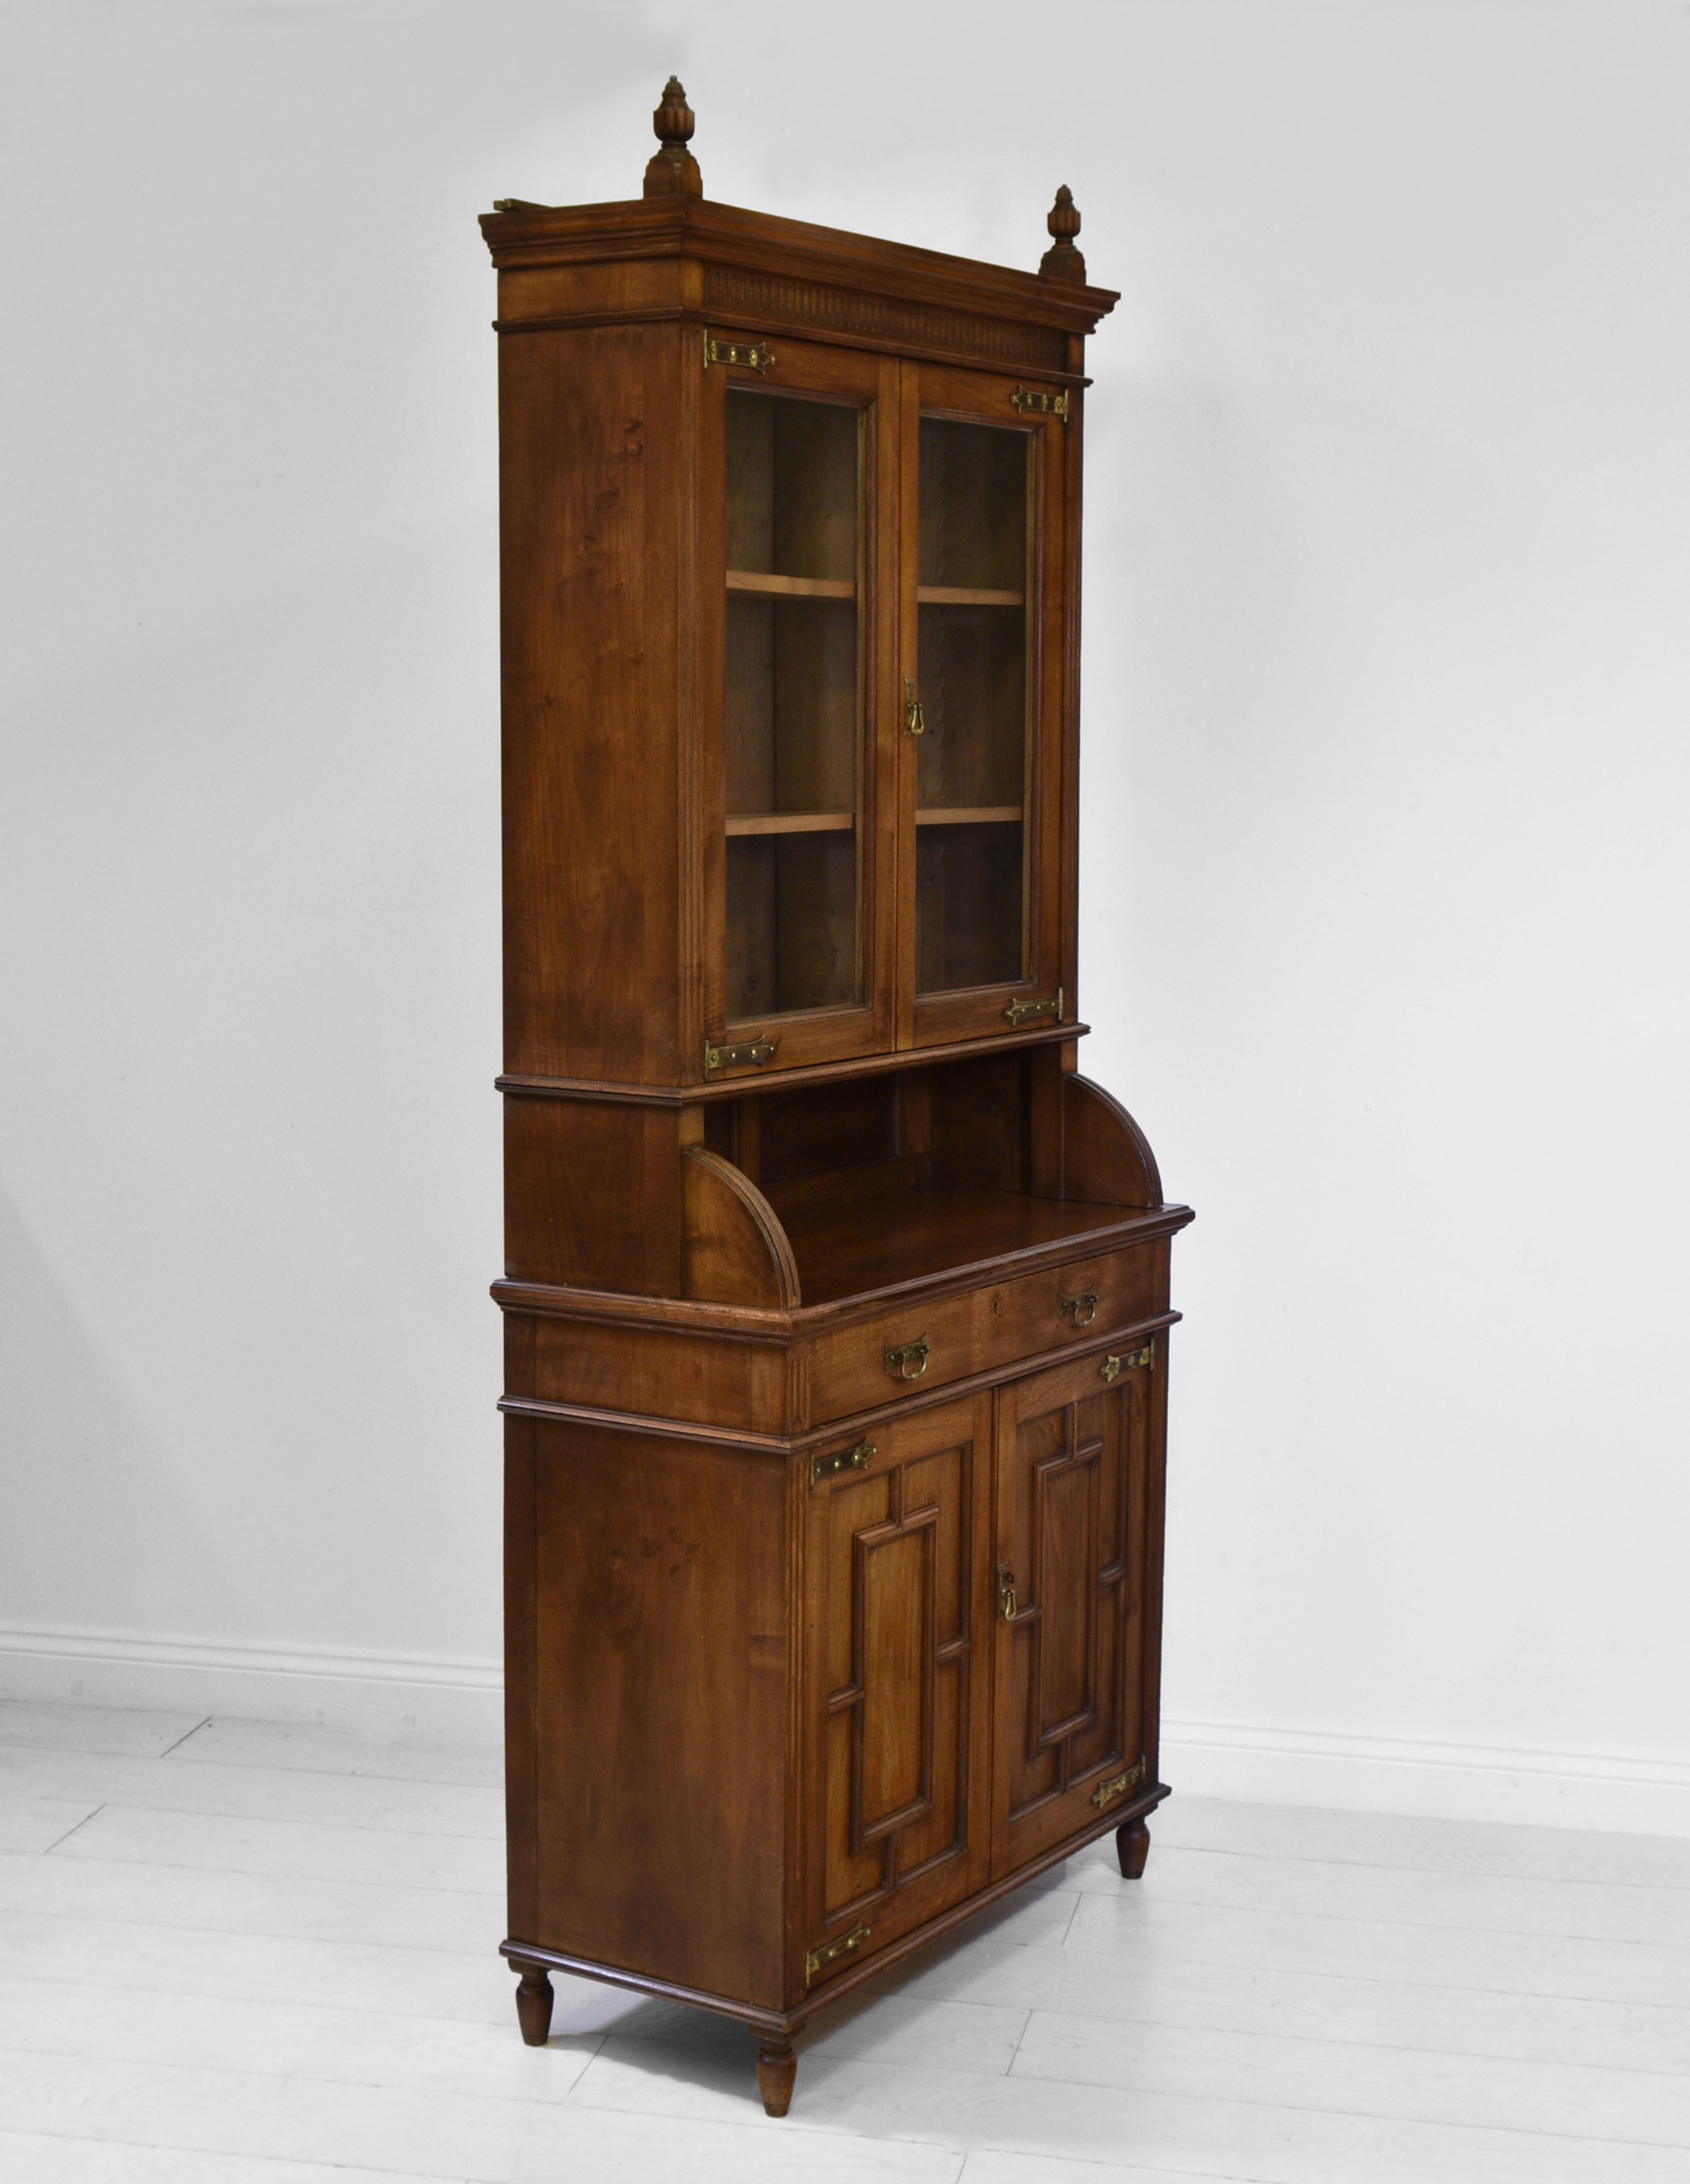 19th Century Antique American Aesthetic Movement Chestnut Tall Bookcase Cabinet 